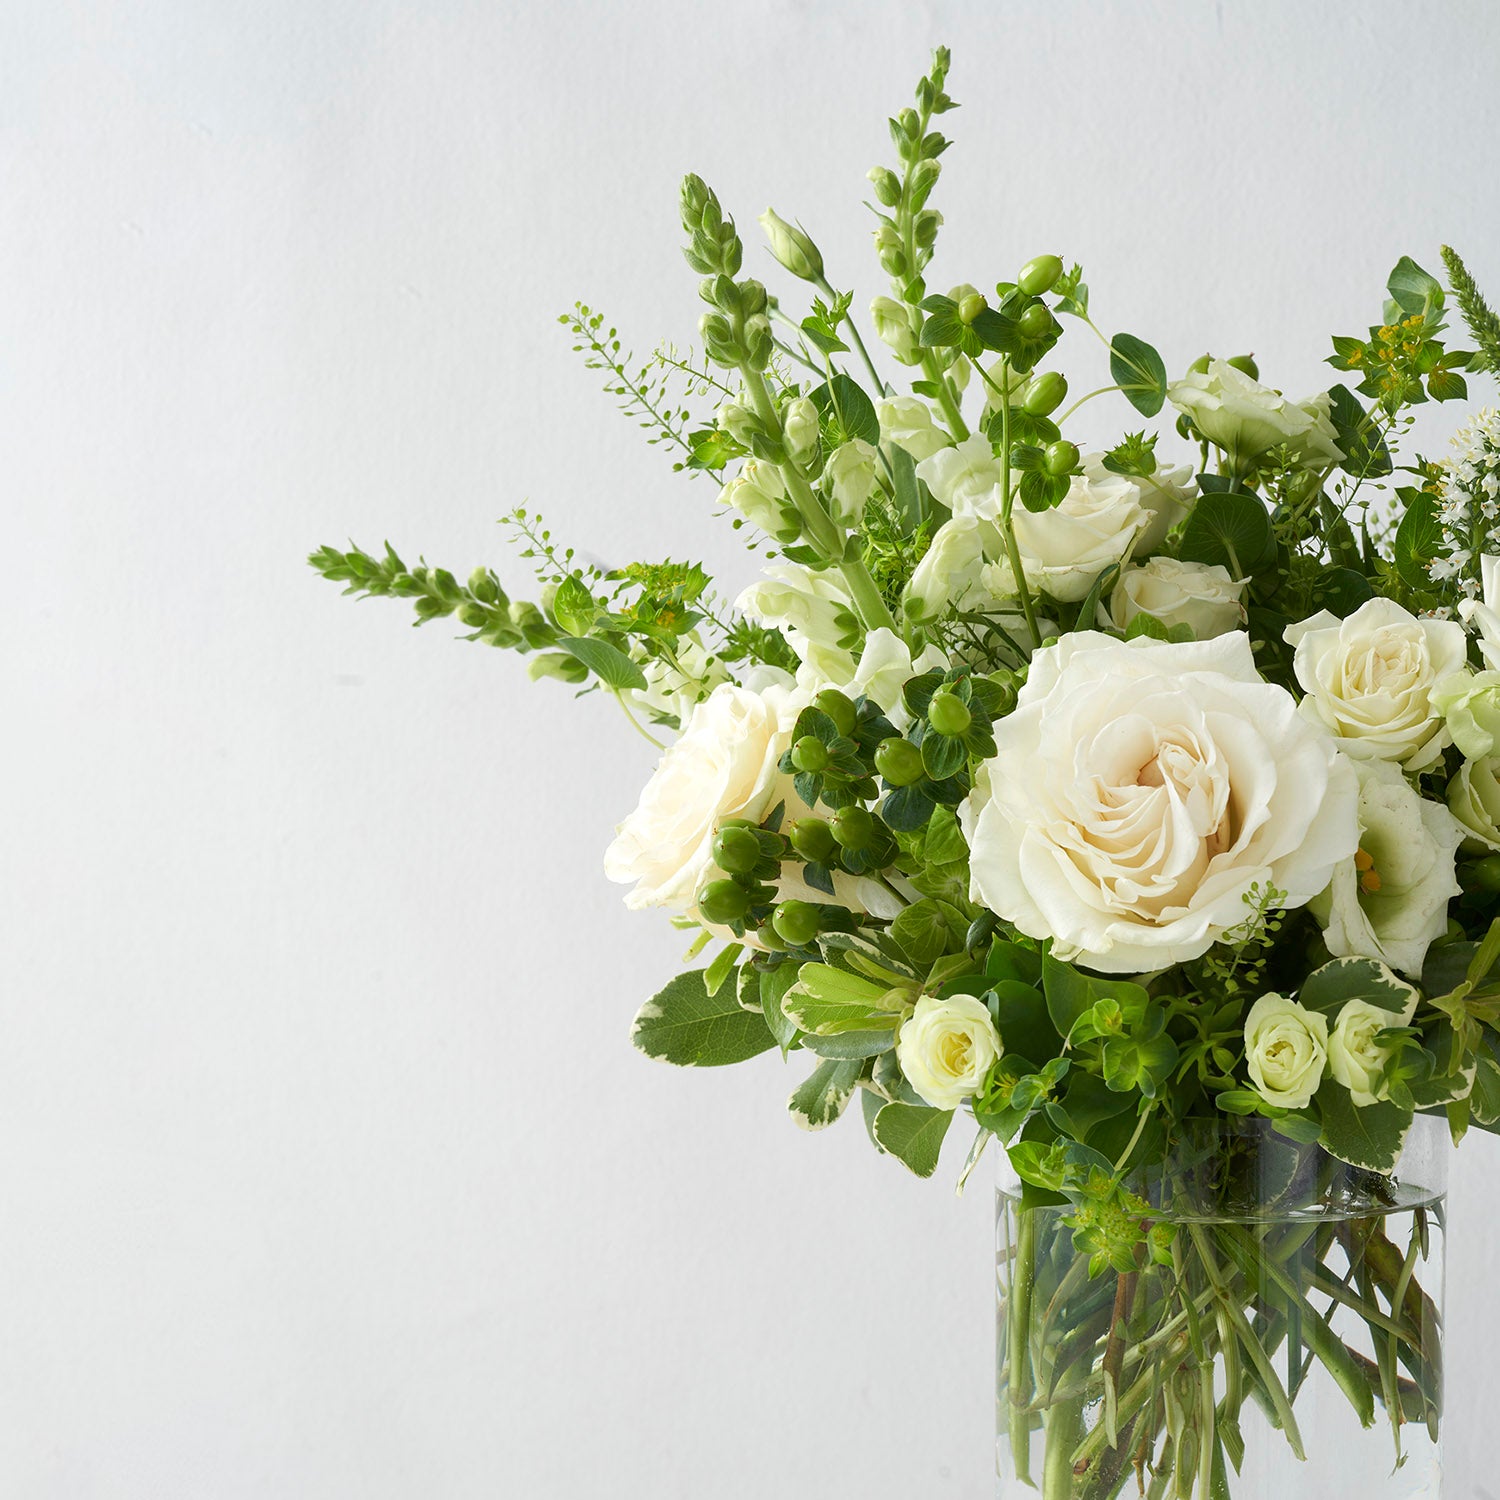 Arrangement of all white and green flowers, including roses lisianthus ans snapdragons, in glass vase on white background.